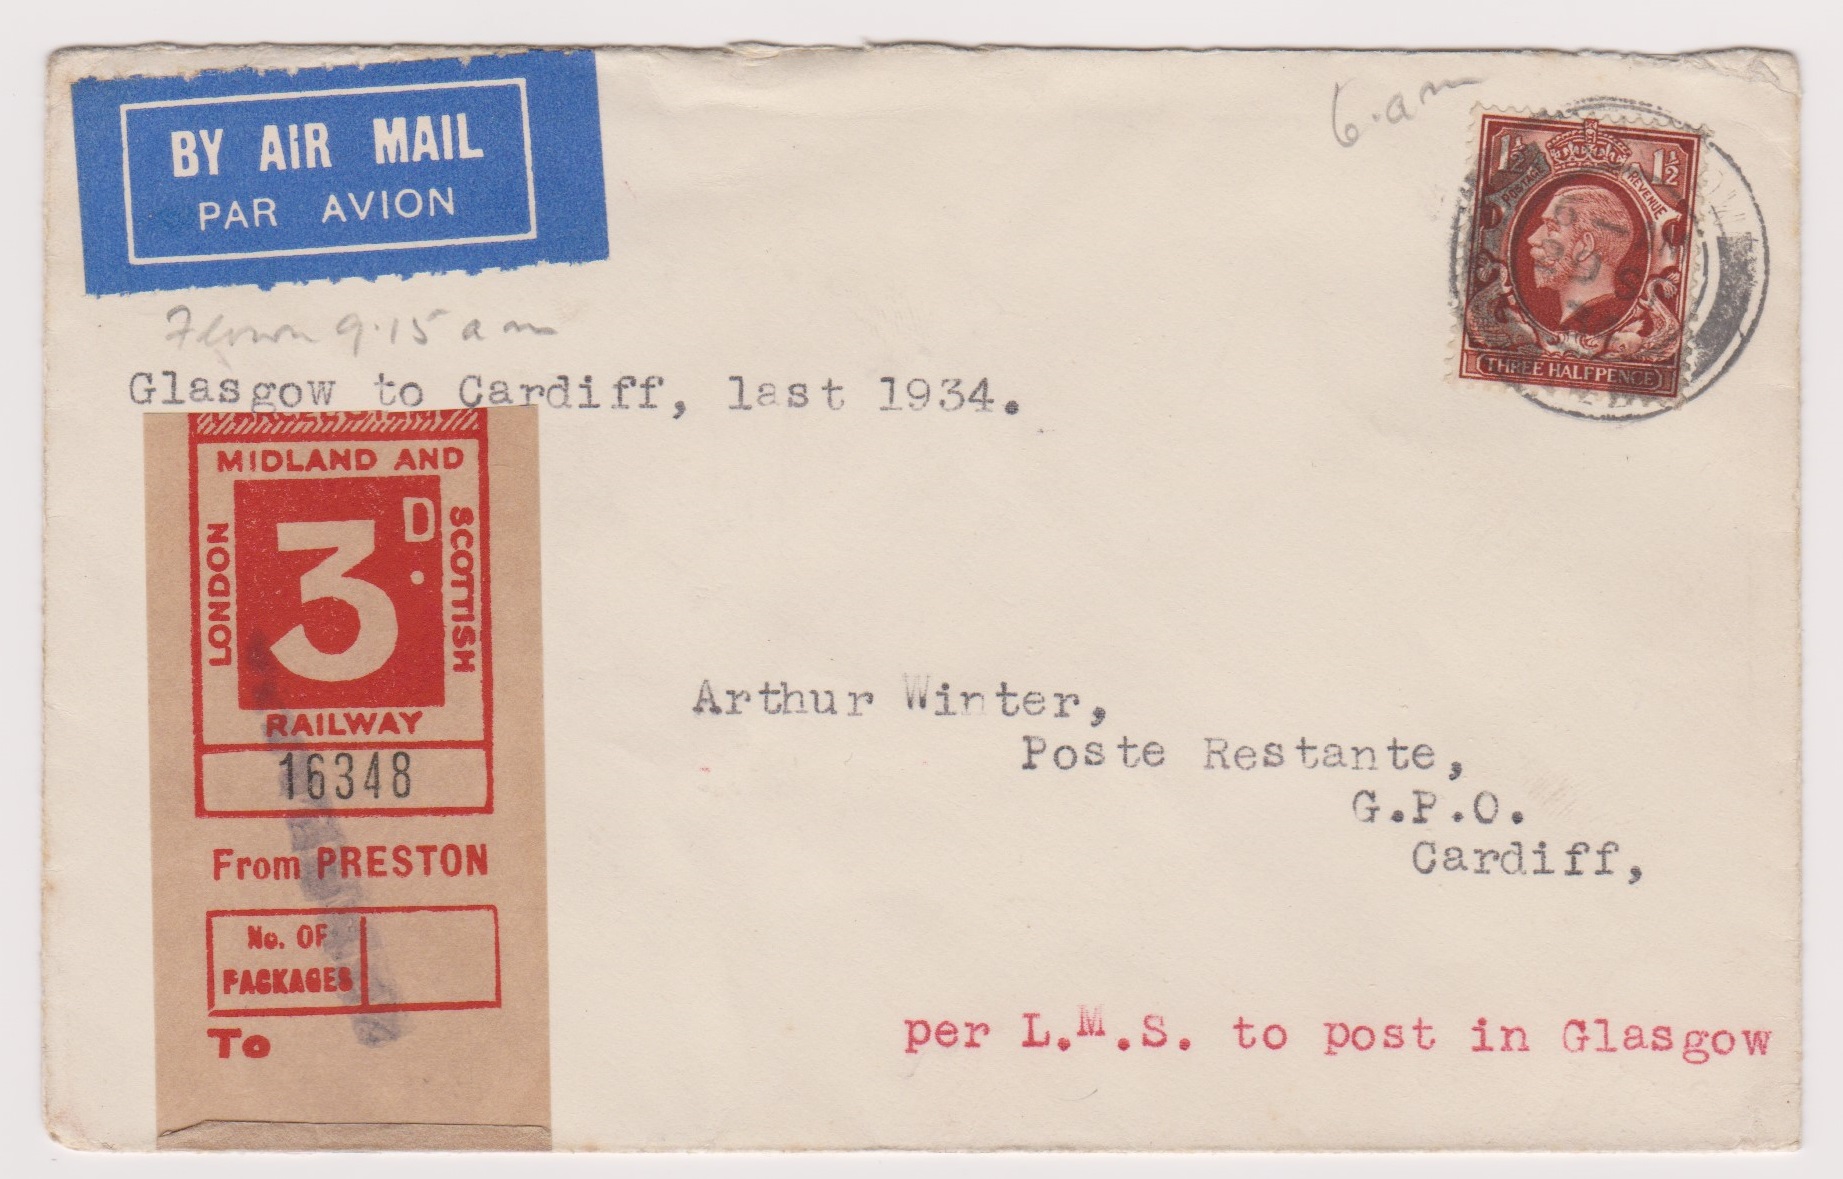 Great Britain 1939 (20 Sept) Flown Airmail Env Glasgow to Cardiff, LMS 3d Stamp per LMS to post in